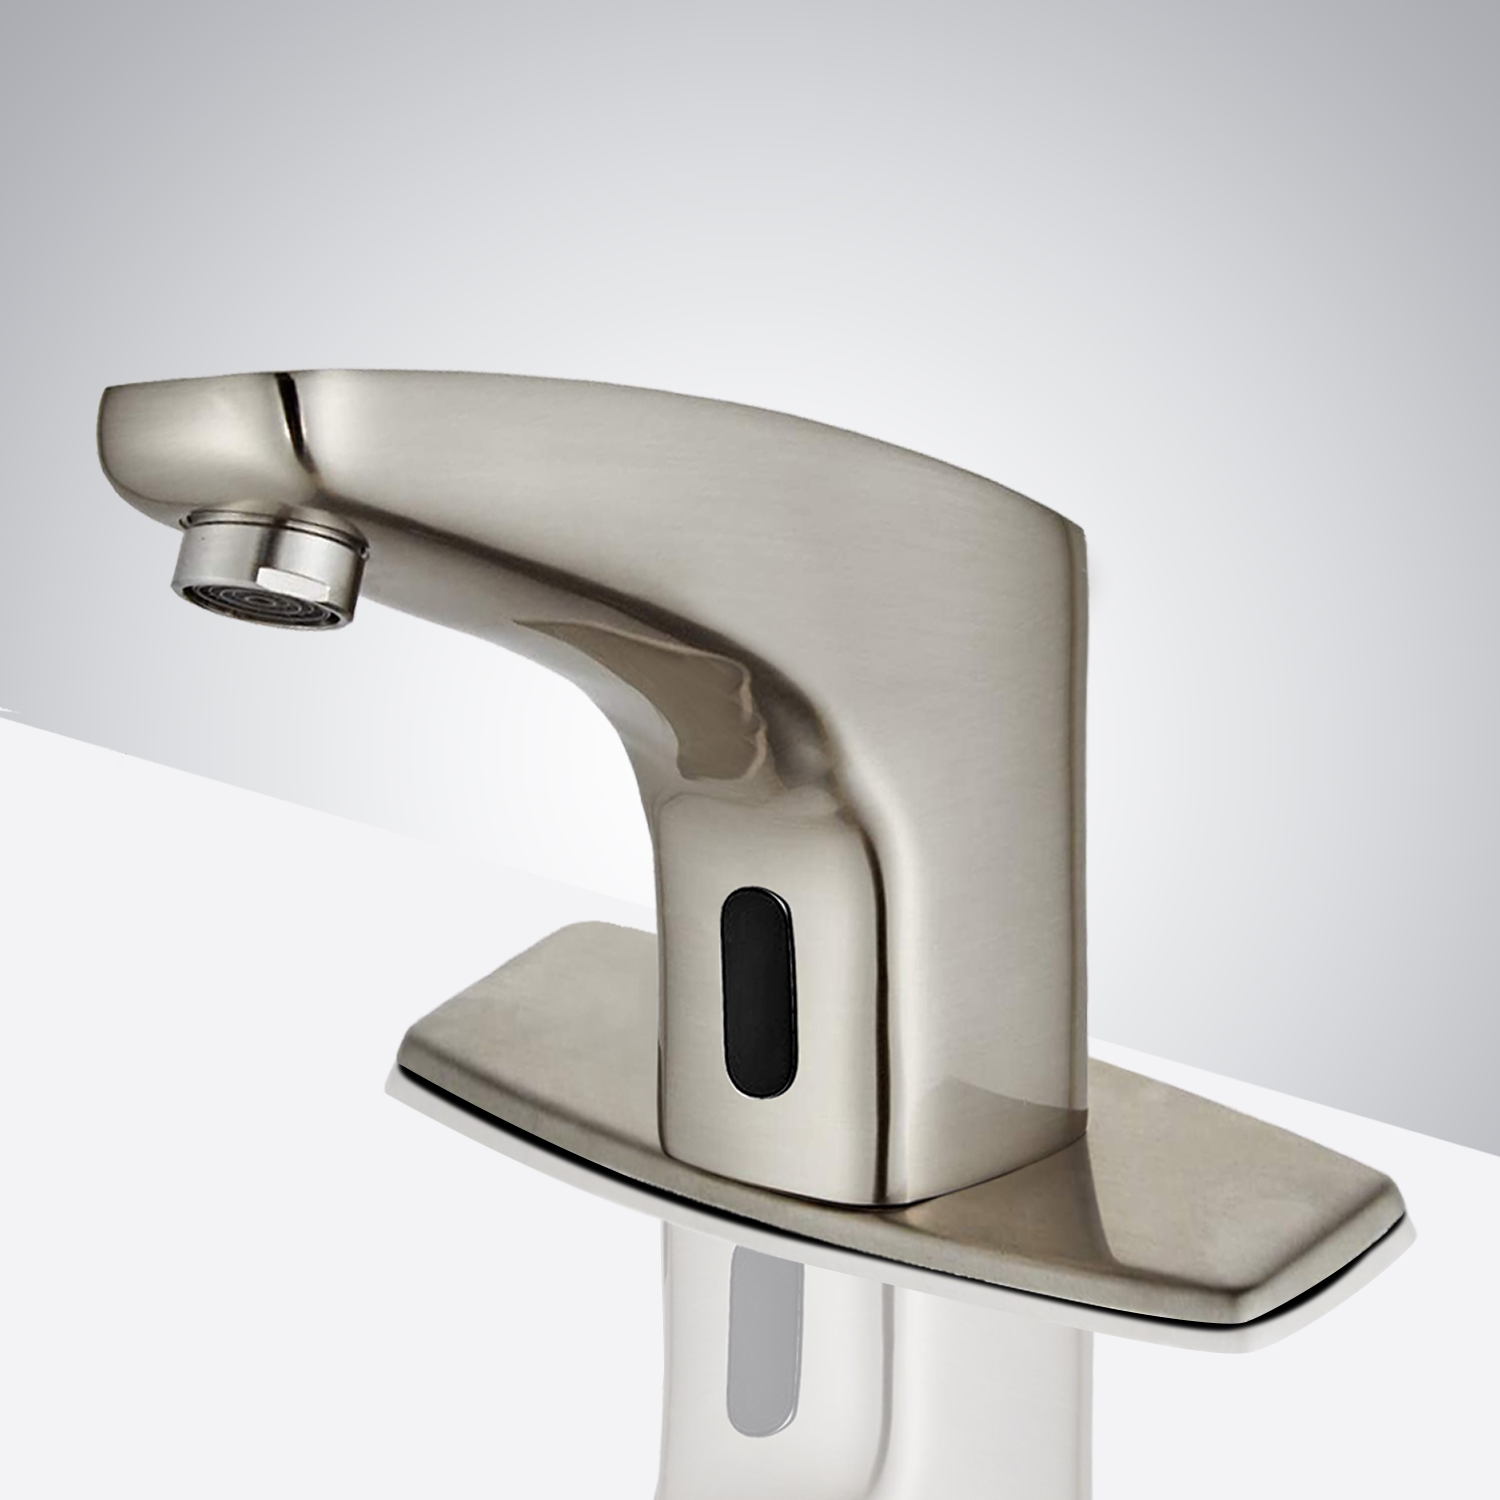 Fontana Commercial High Quality Brushed Nickel Touchless Automatic Sensor Sink Faucet